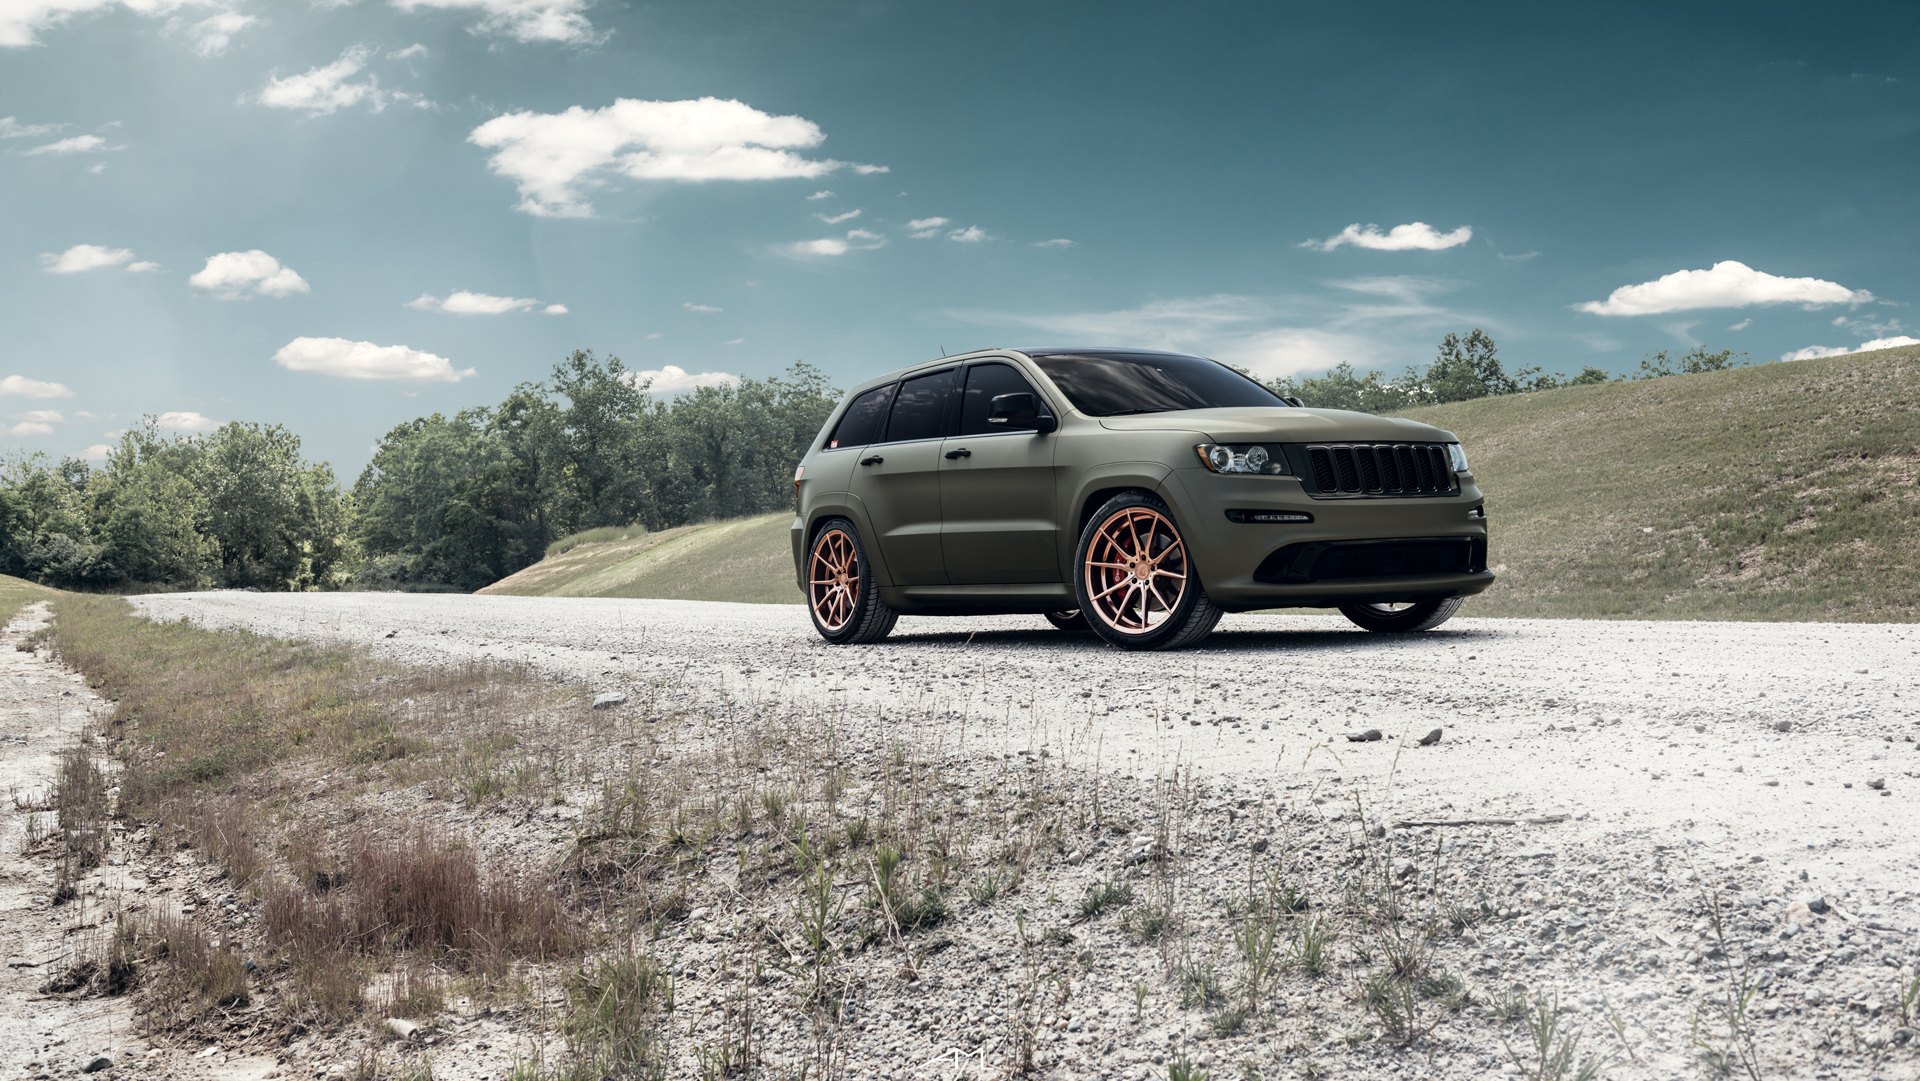 Aftermarket Side Skirts on Olive Matte Jeep Grand Cherokee - Photo by Arlen Liverman